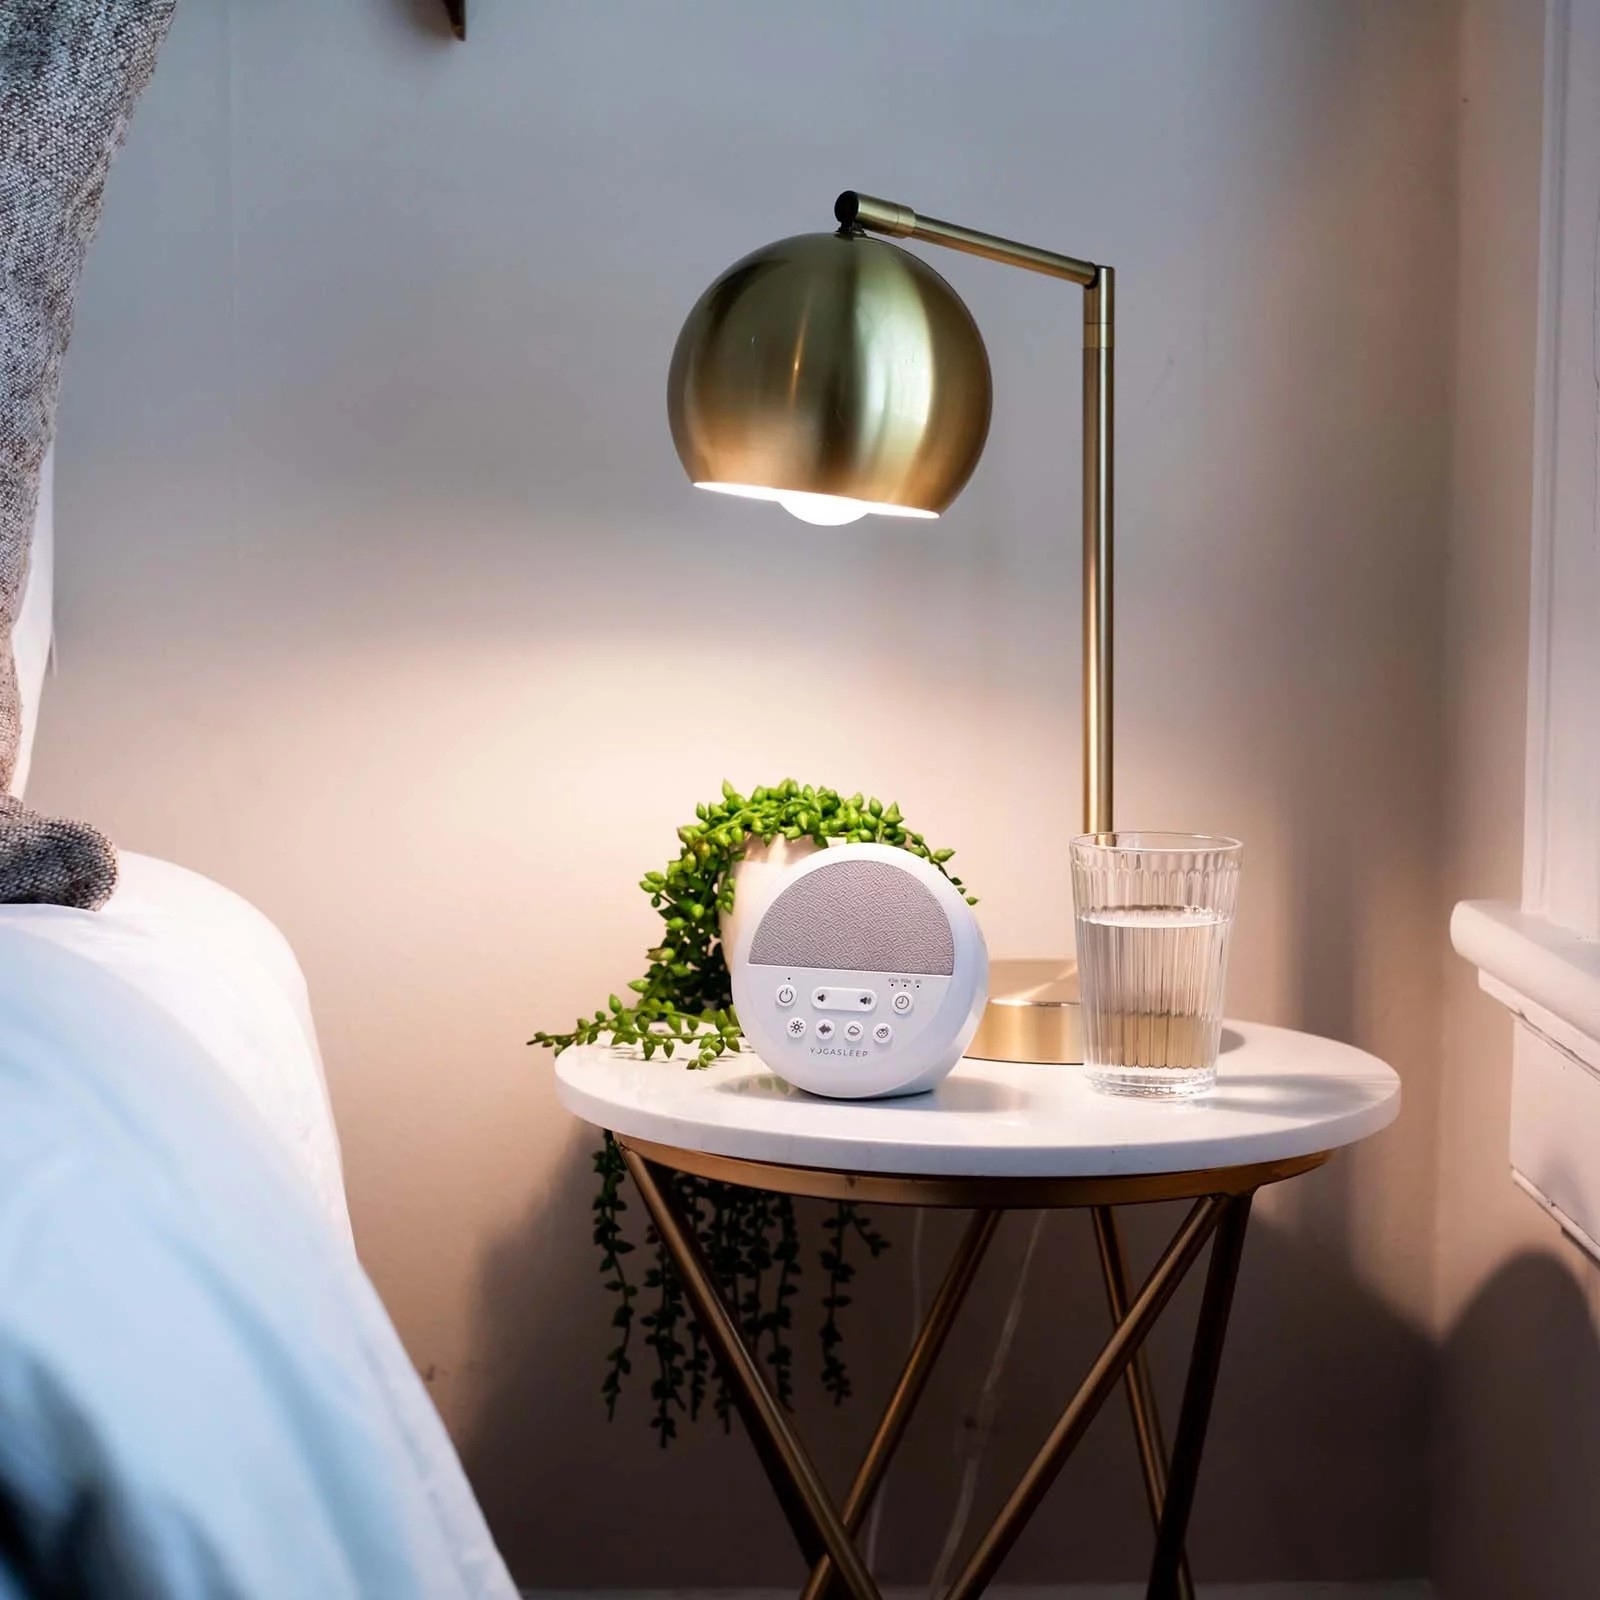 Modern bedside table featuring a stylish lamp, a smart speaker, a plant, and a glass of water